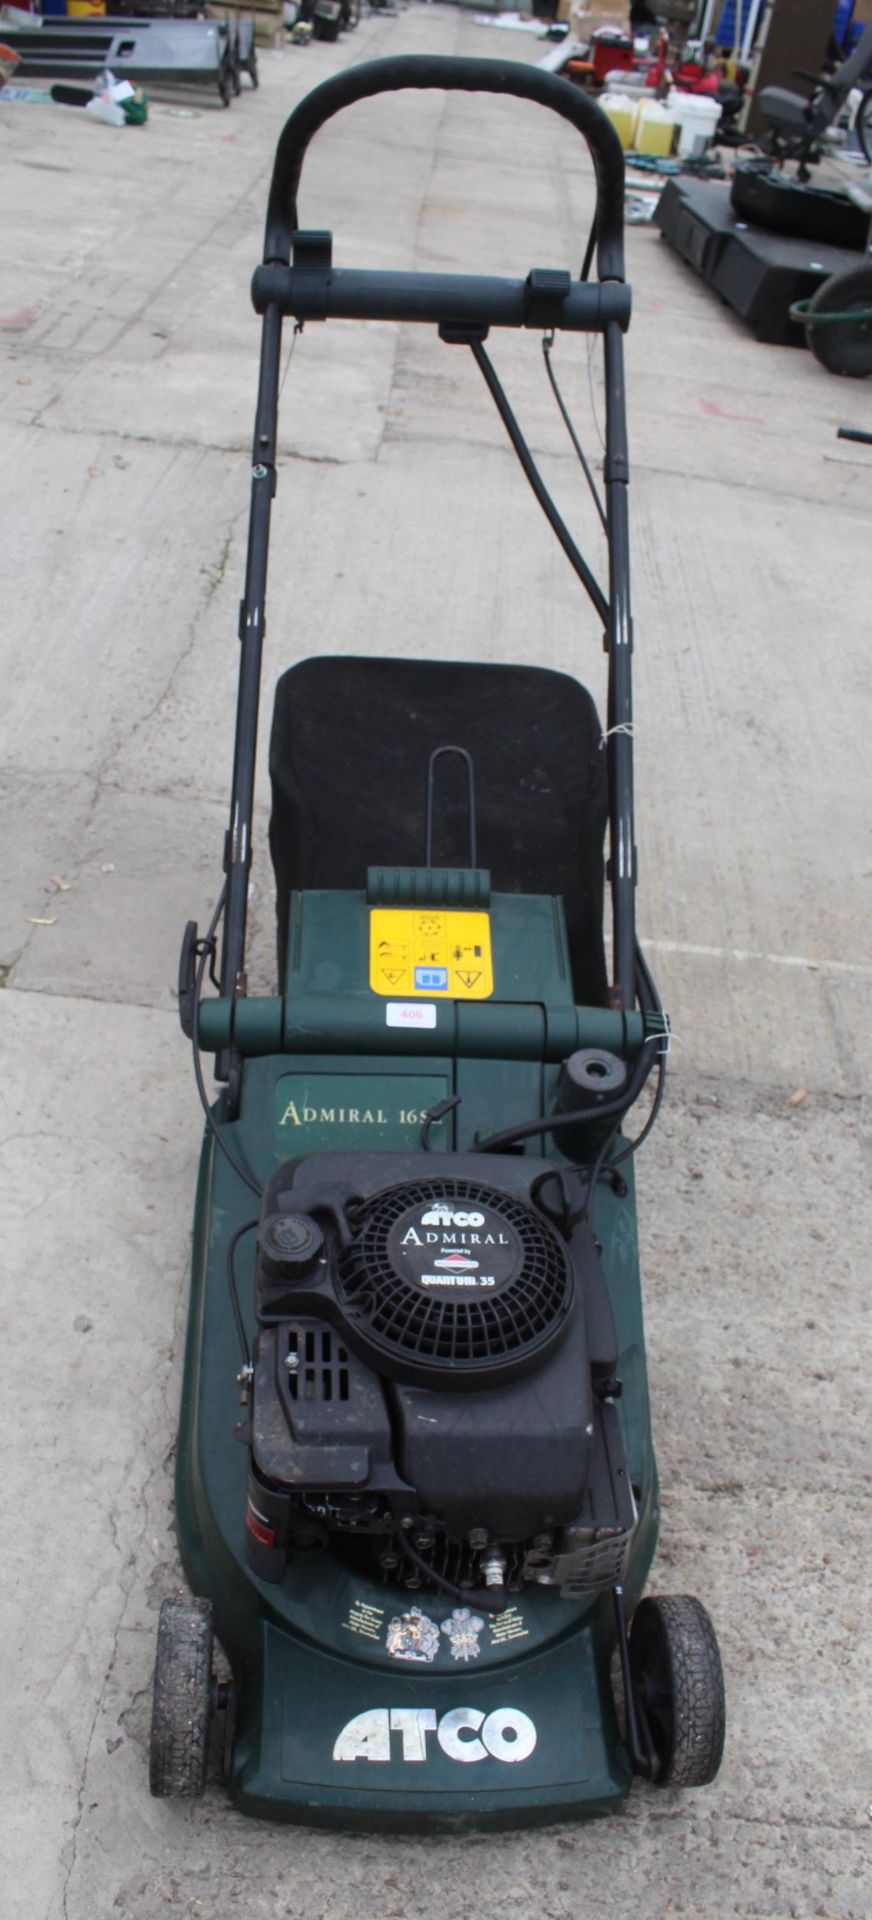 AN ATCO ADMIRAL 16SE PETROL ENGINE LAWN MOWER WITH BRIGGFS AND STRATTON ENGINE NO VAT